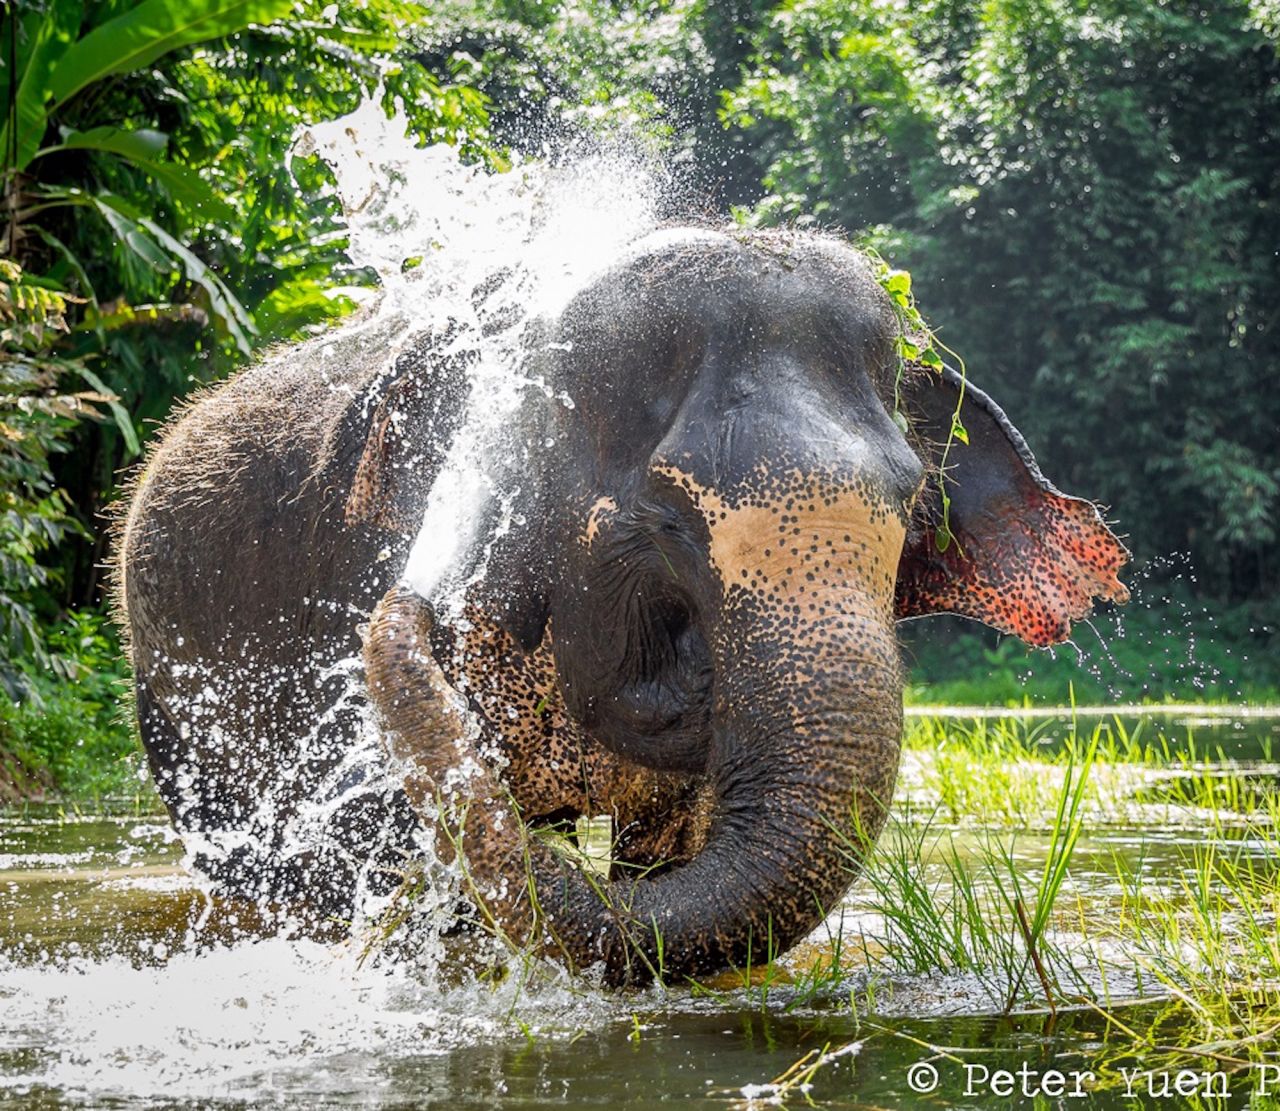 <strong>Madee: </strong>Elephant Madee, 60, spent most of her life in Narathiwat province near the Thai/Malay border working in the logging industry. In 2009 she was sold and relocated to Phuket, where she gave rides to tourists. 